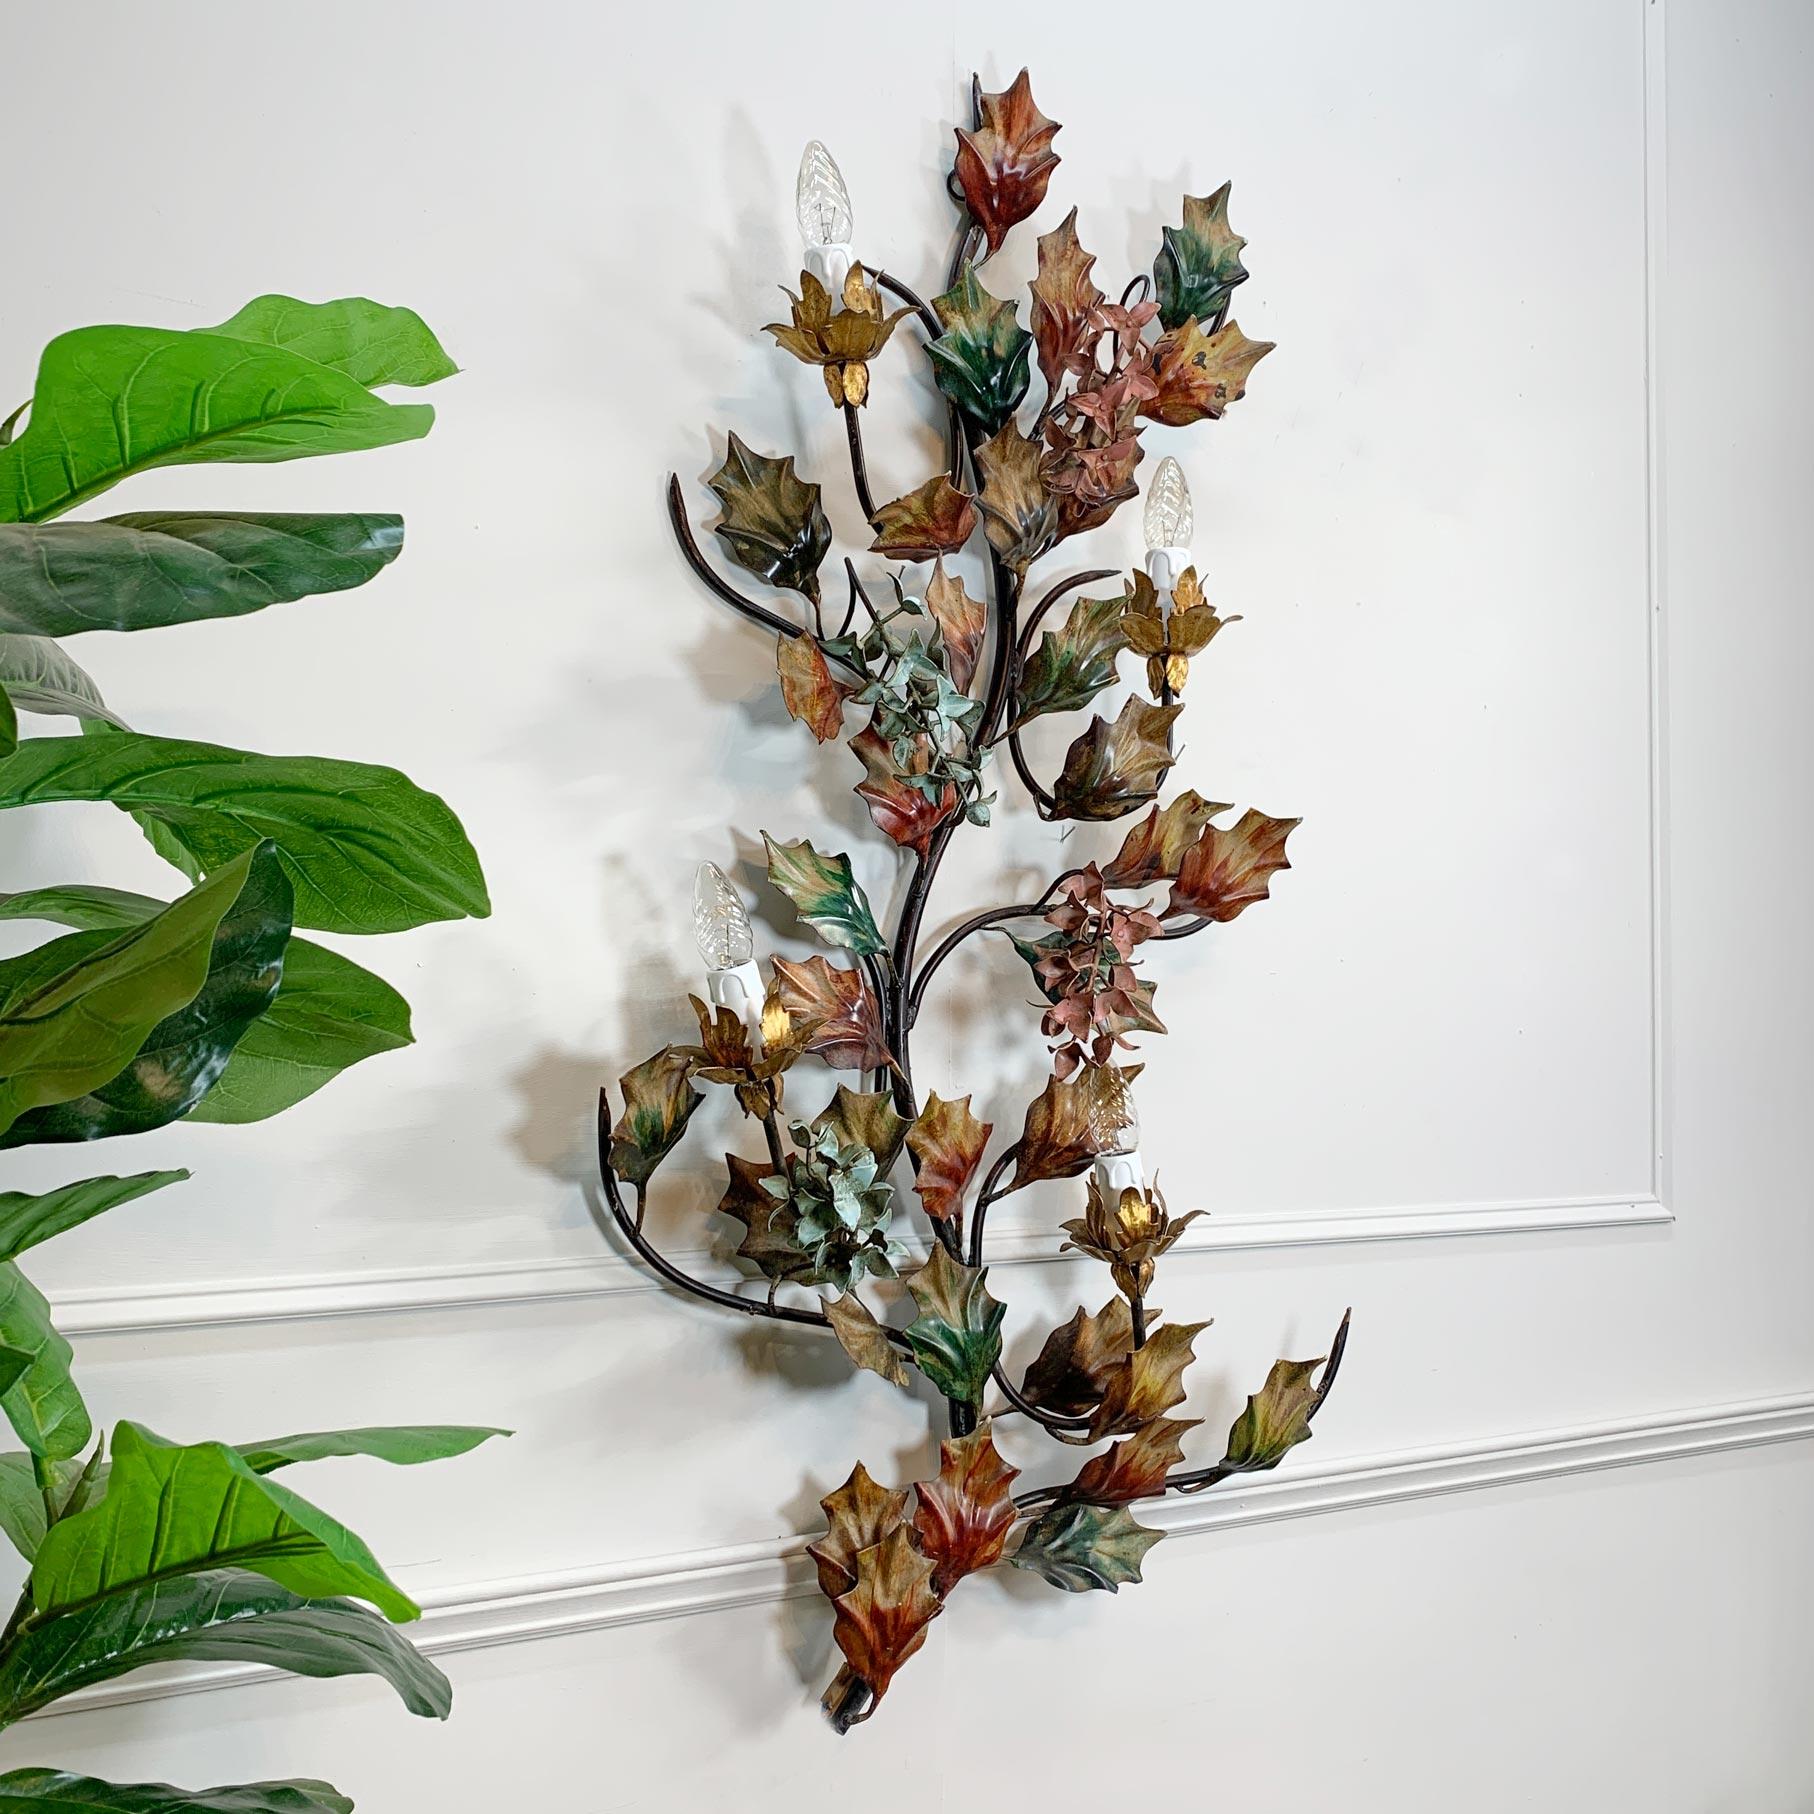 Stunningly detailed wall light, hand crafted holly leaves interspersed with wisteria flowers, the entire piece has been painstakingly hand-painted, in vivid natural greens, autumnal tan, browns and reddish hues. The wisteria flowers in soft duck egg